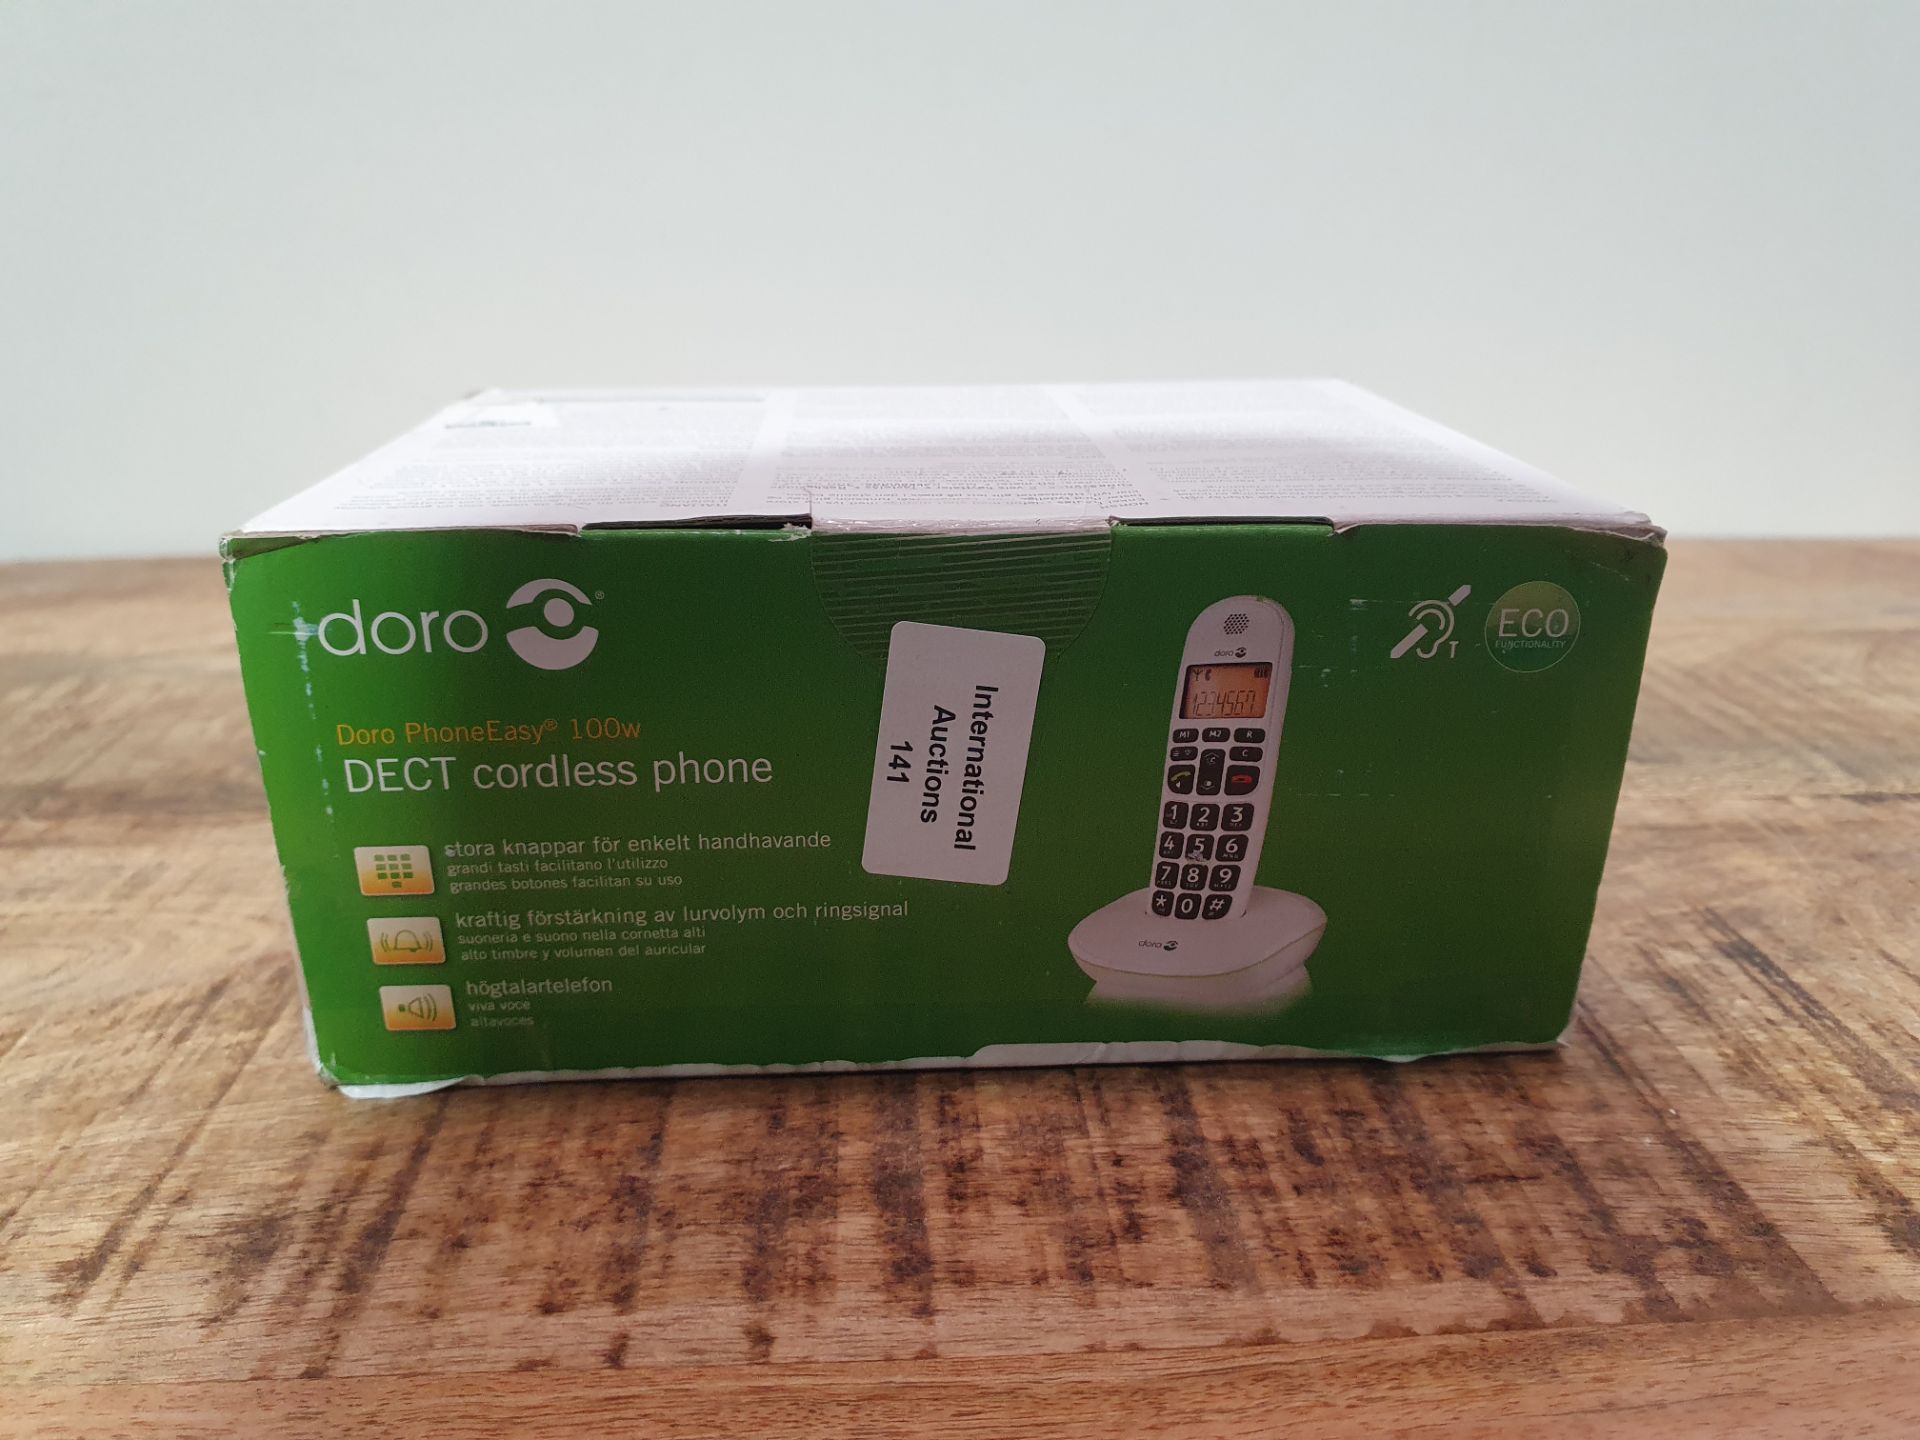 DORO DECT CORDLESS PHONE RRP £59.99Condition ReportAppraisal Available on Request - All Items are